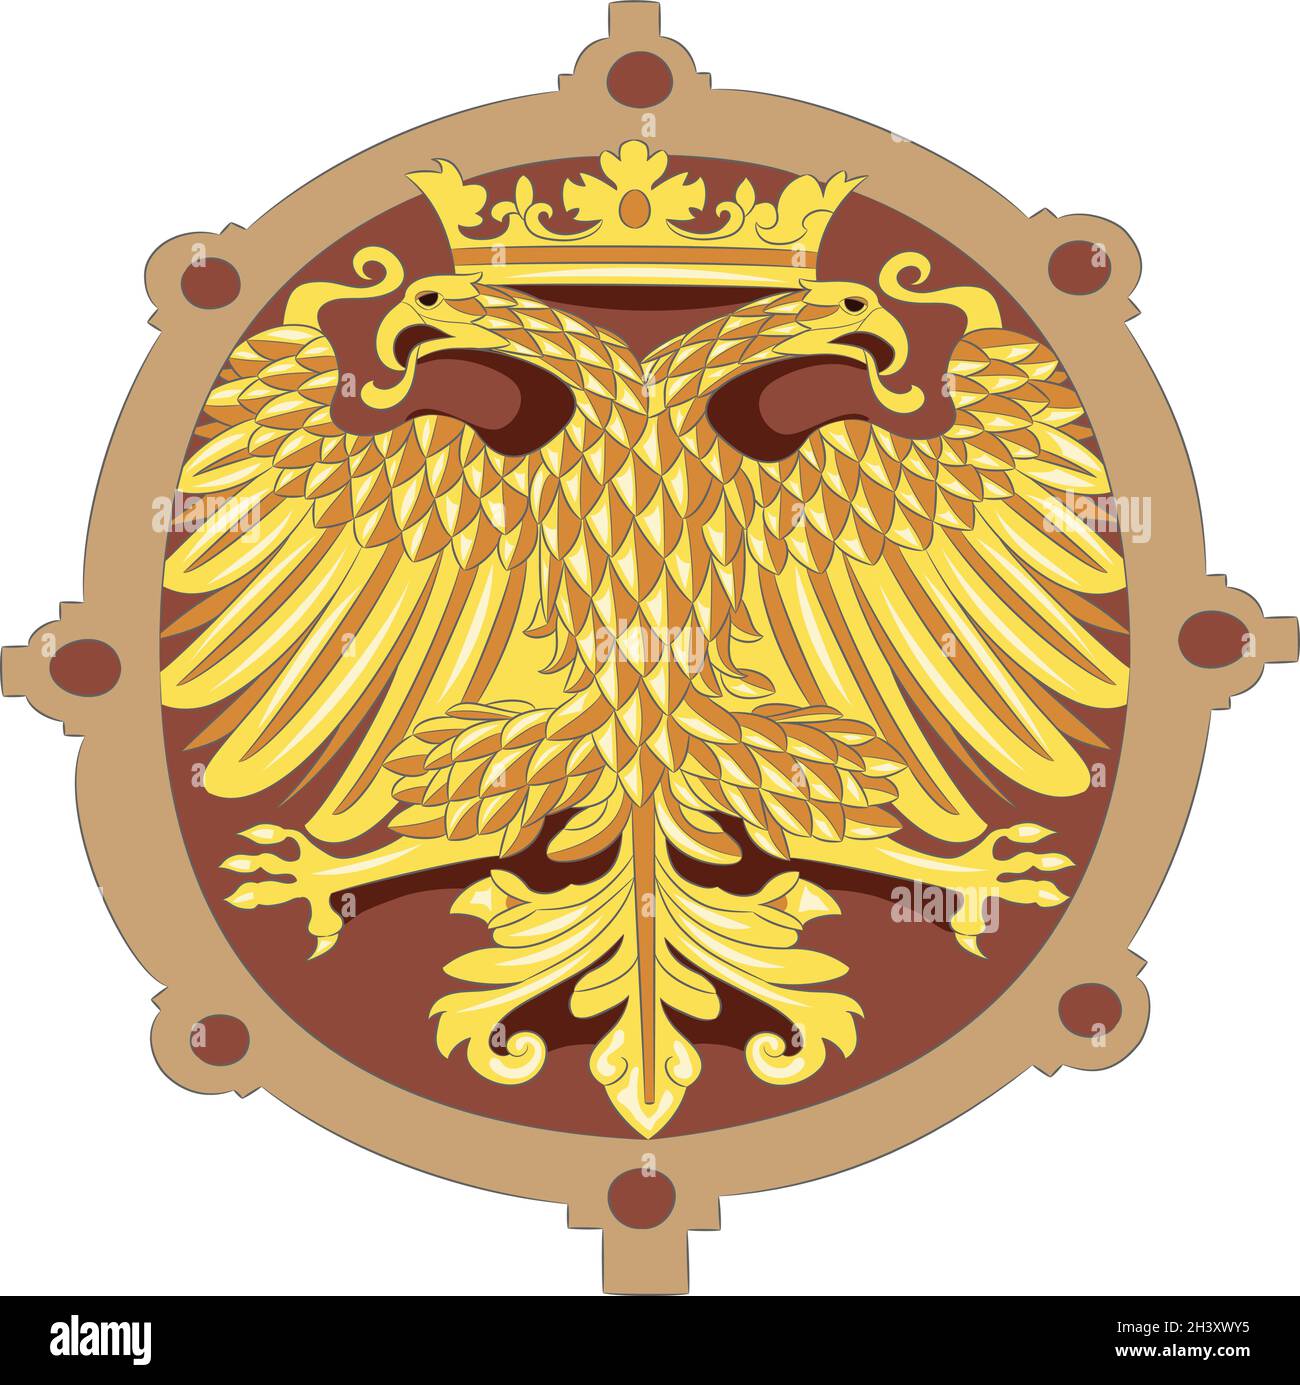 Double eagle with coat of arms Stock Vector Images - Alamy